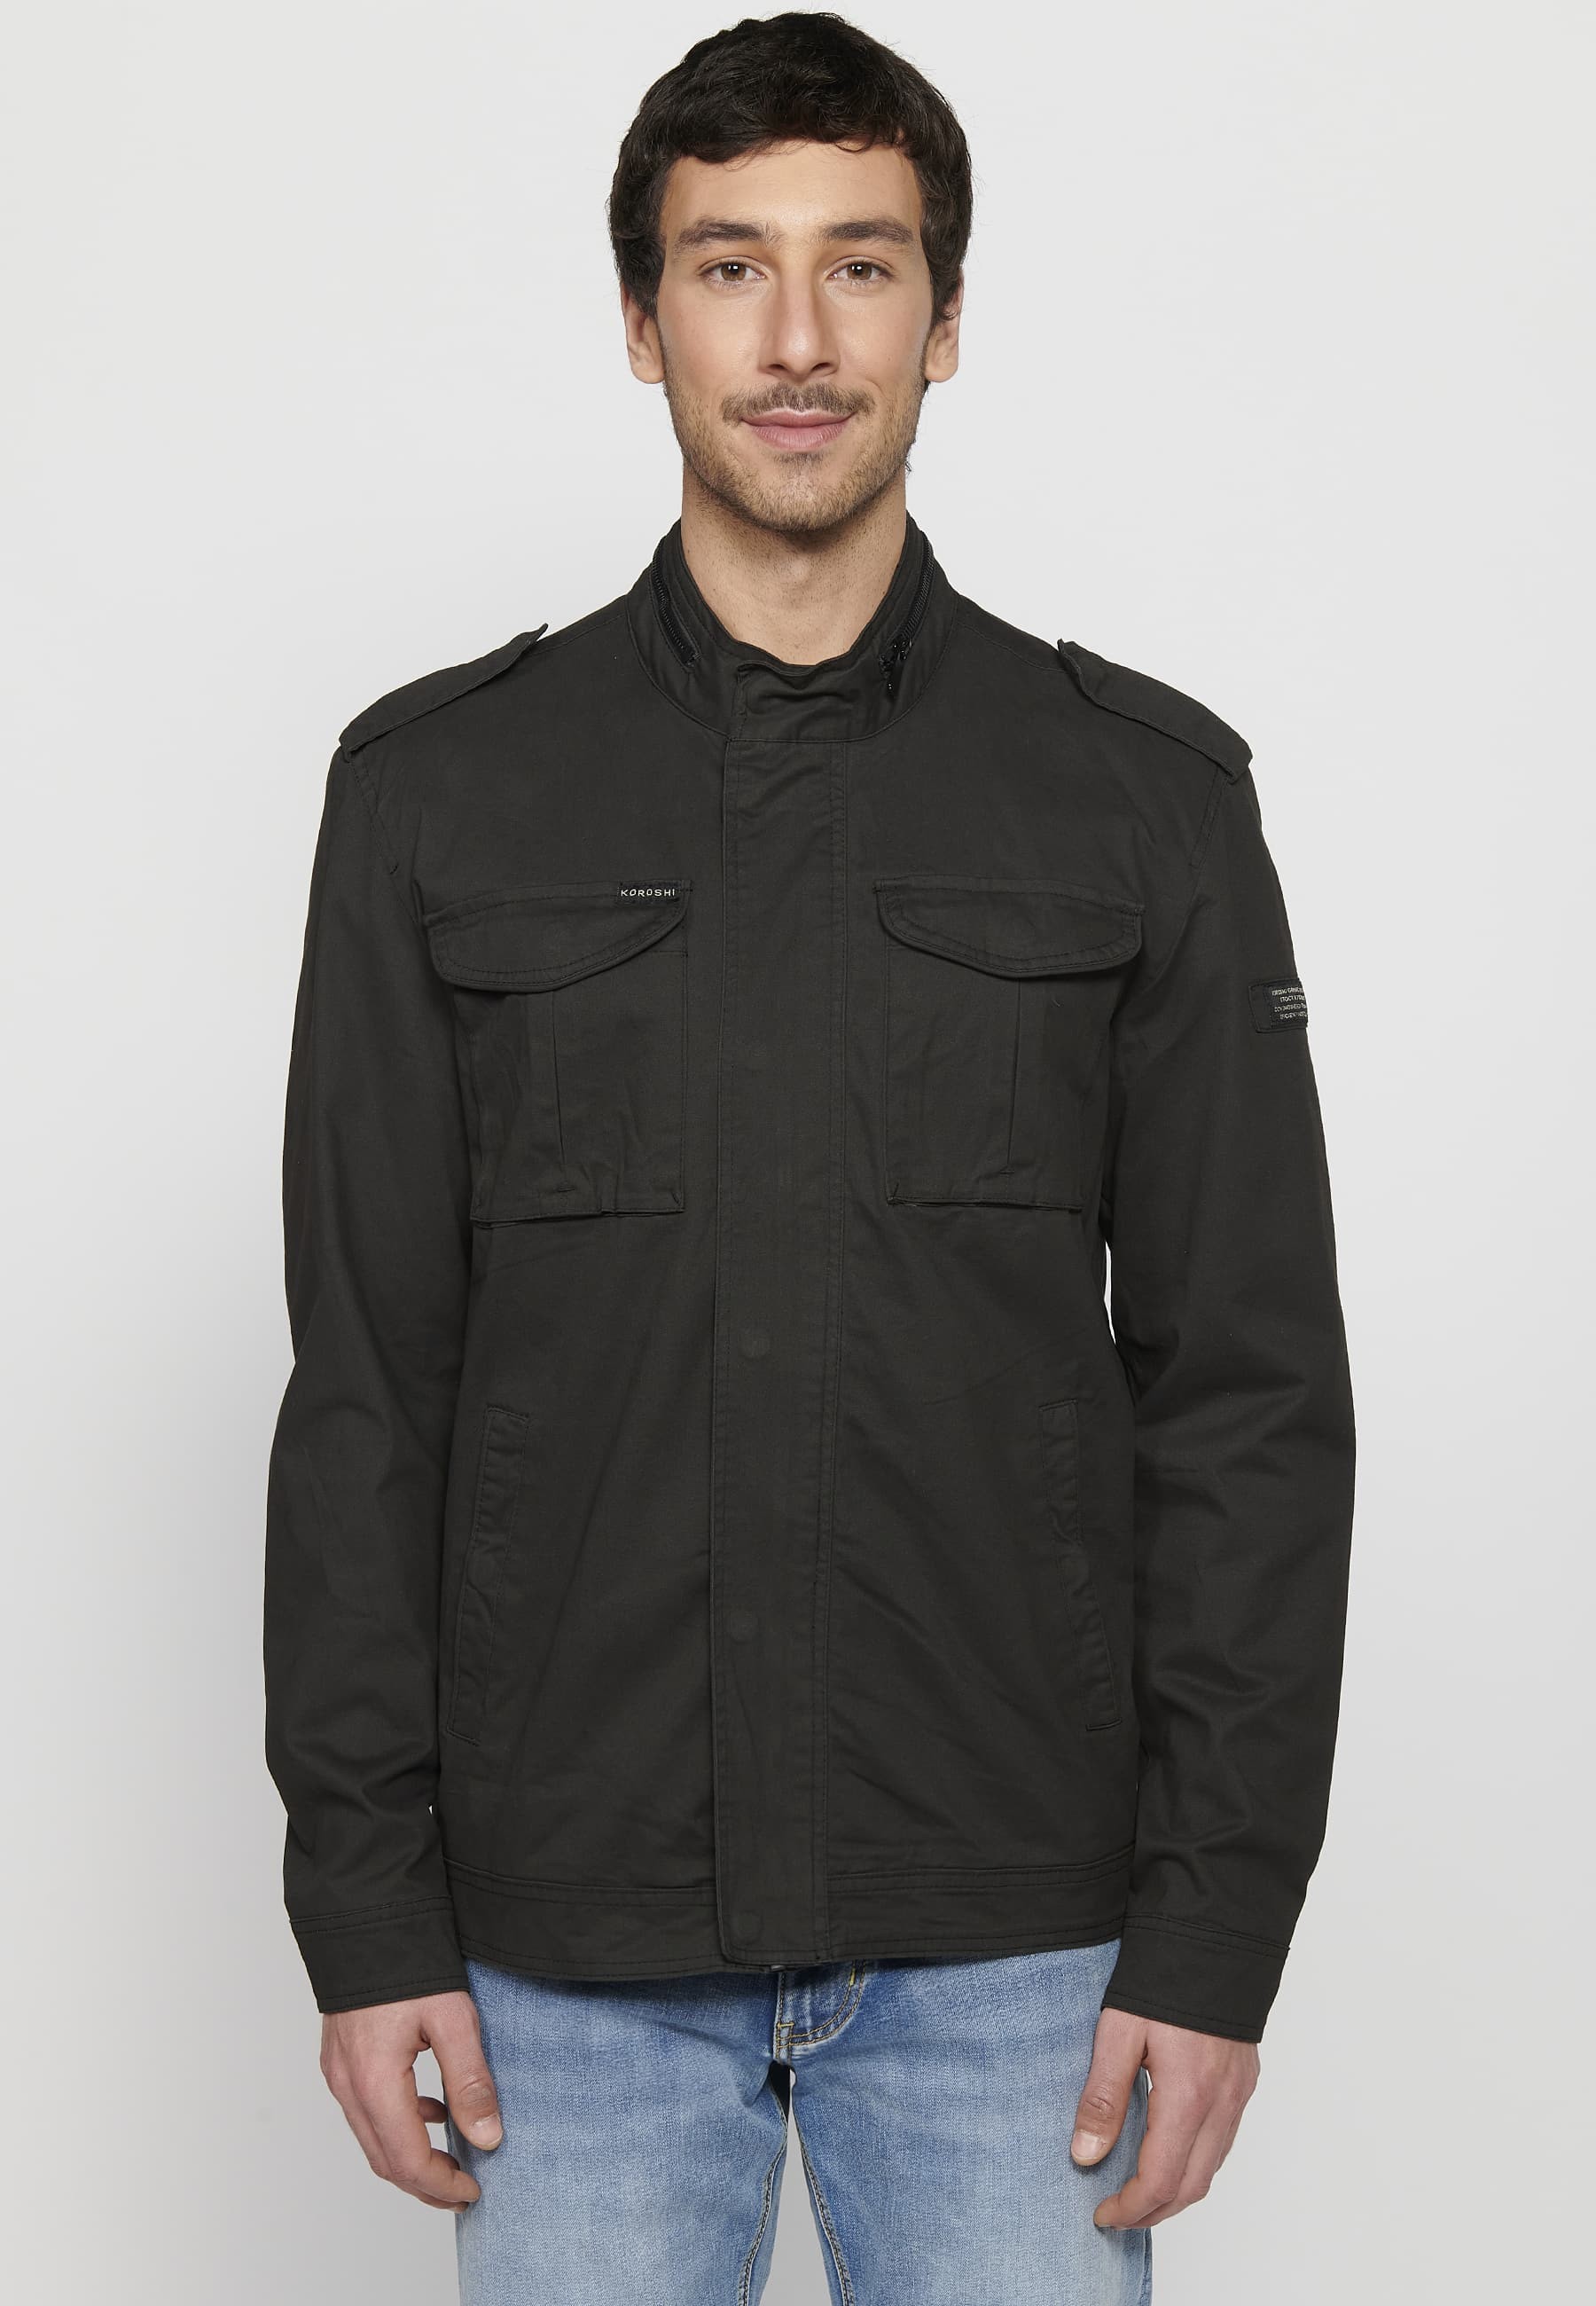 Long-sleeved jacket with high collar and front zipper closure with pockets in black for men.